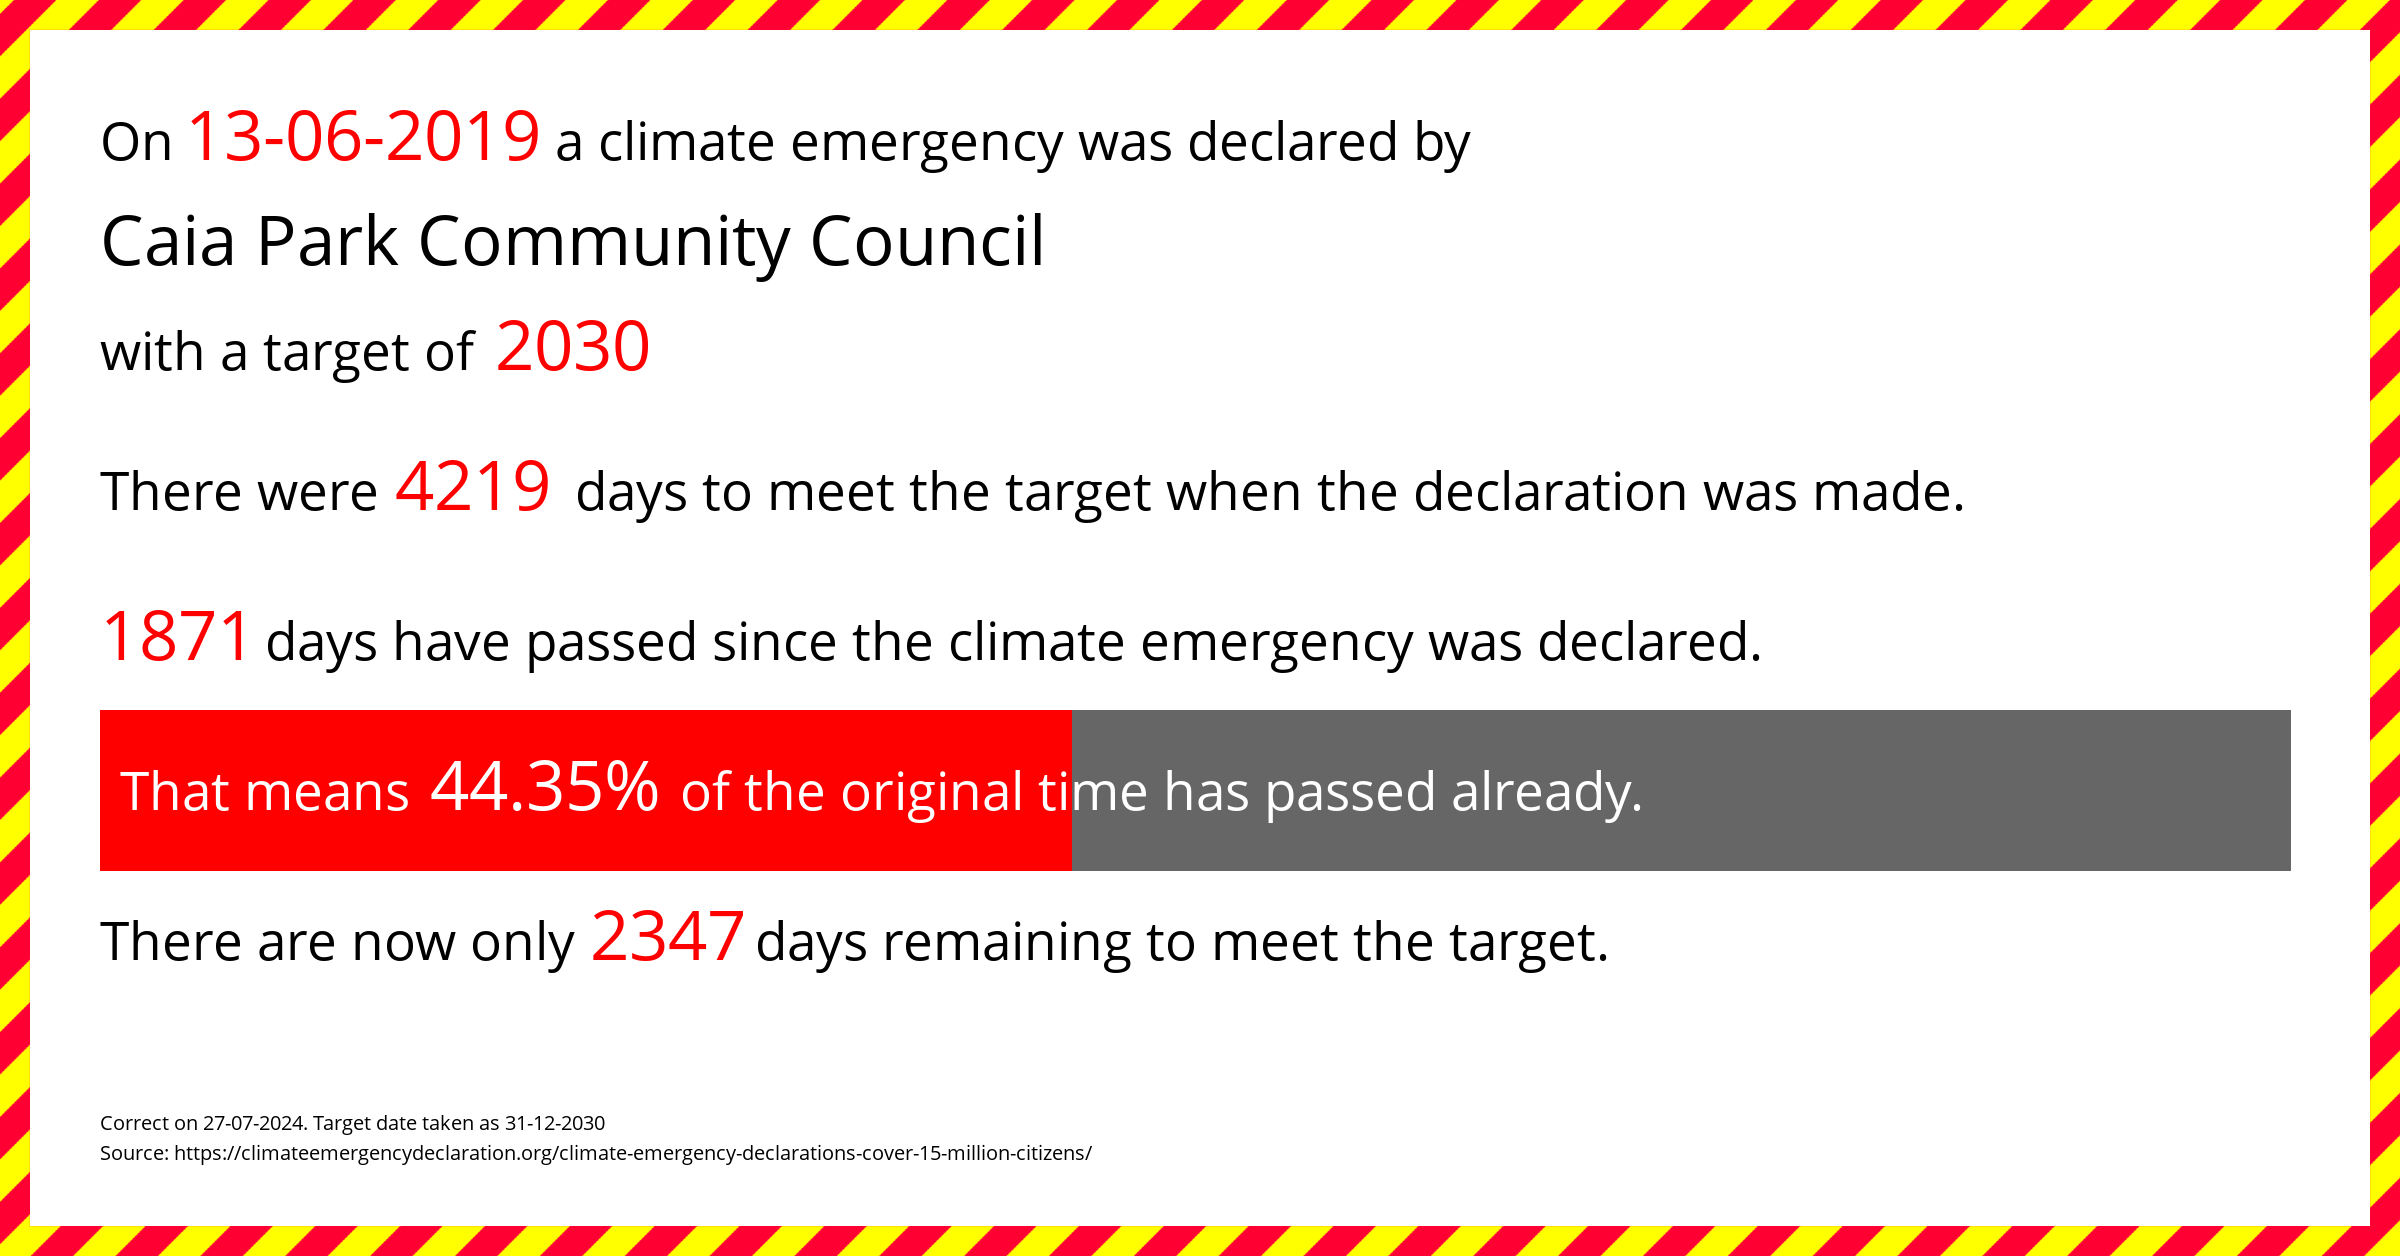 Caia Park Community Council declared a Climate emergency on Thursday 13th June 2019, with a target of 2030.